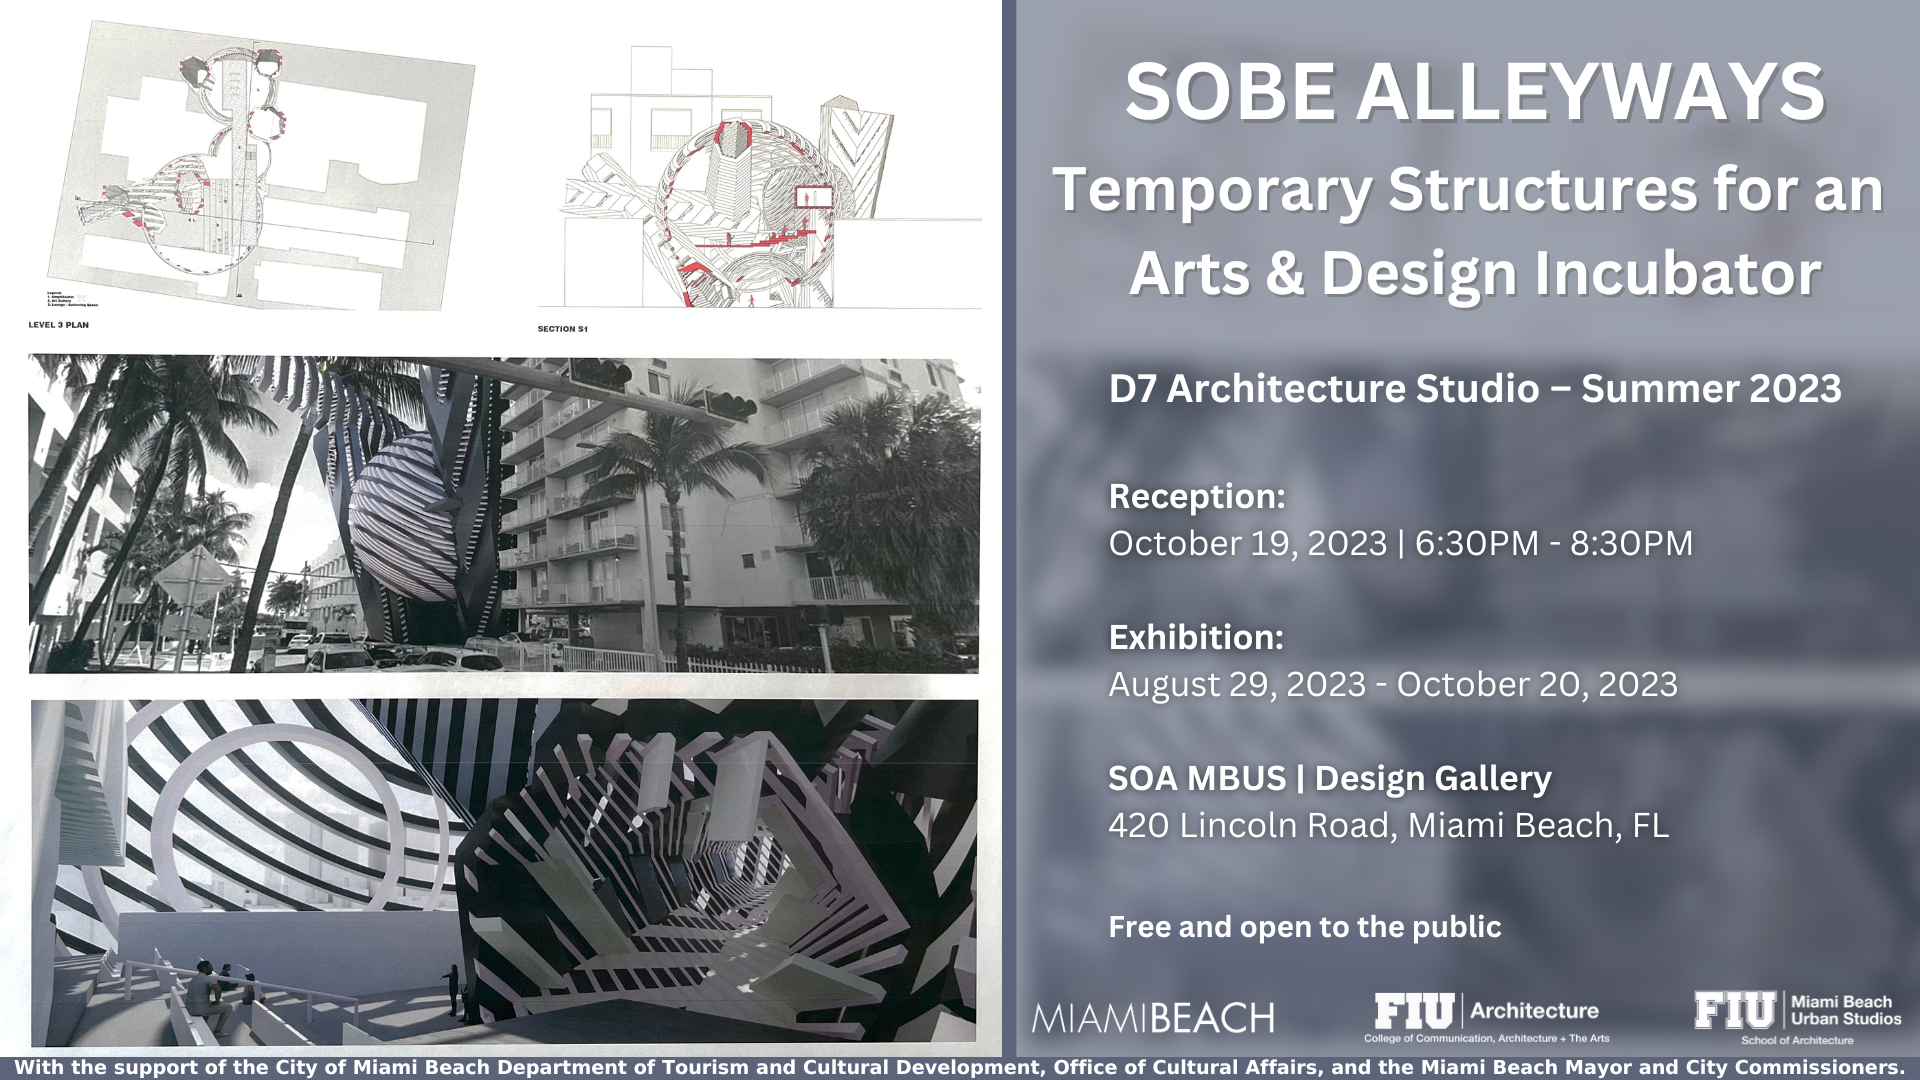 SOBE ALLEYWAYS Temporary Structures for an Arts & Design Incubato (2)